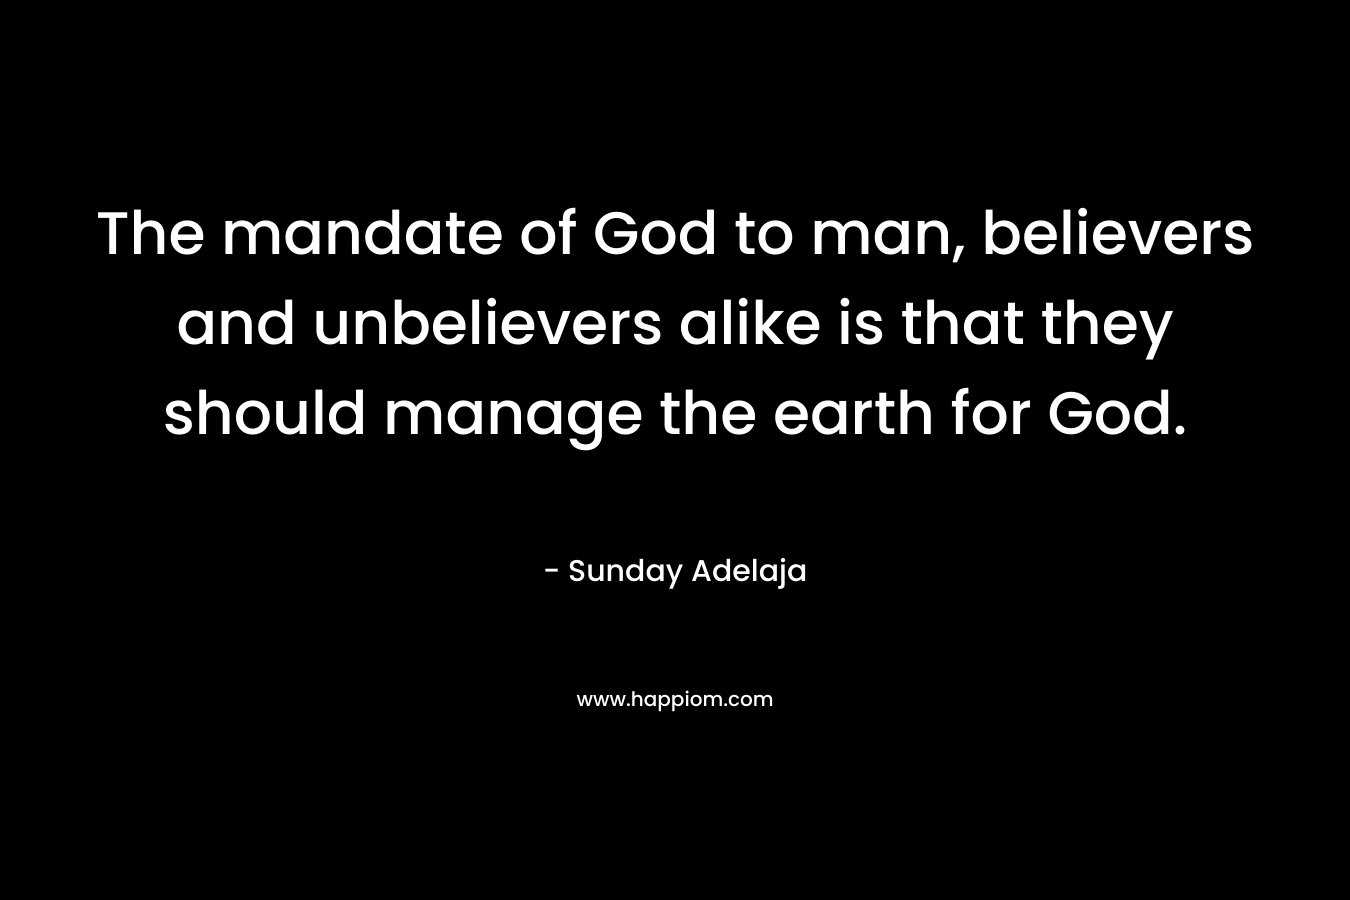 The mandate of God to man, believers and unbelievers alike is that they should manage the earth for God.